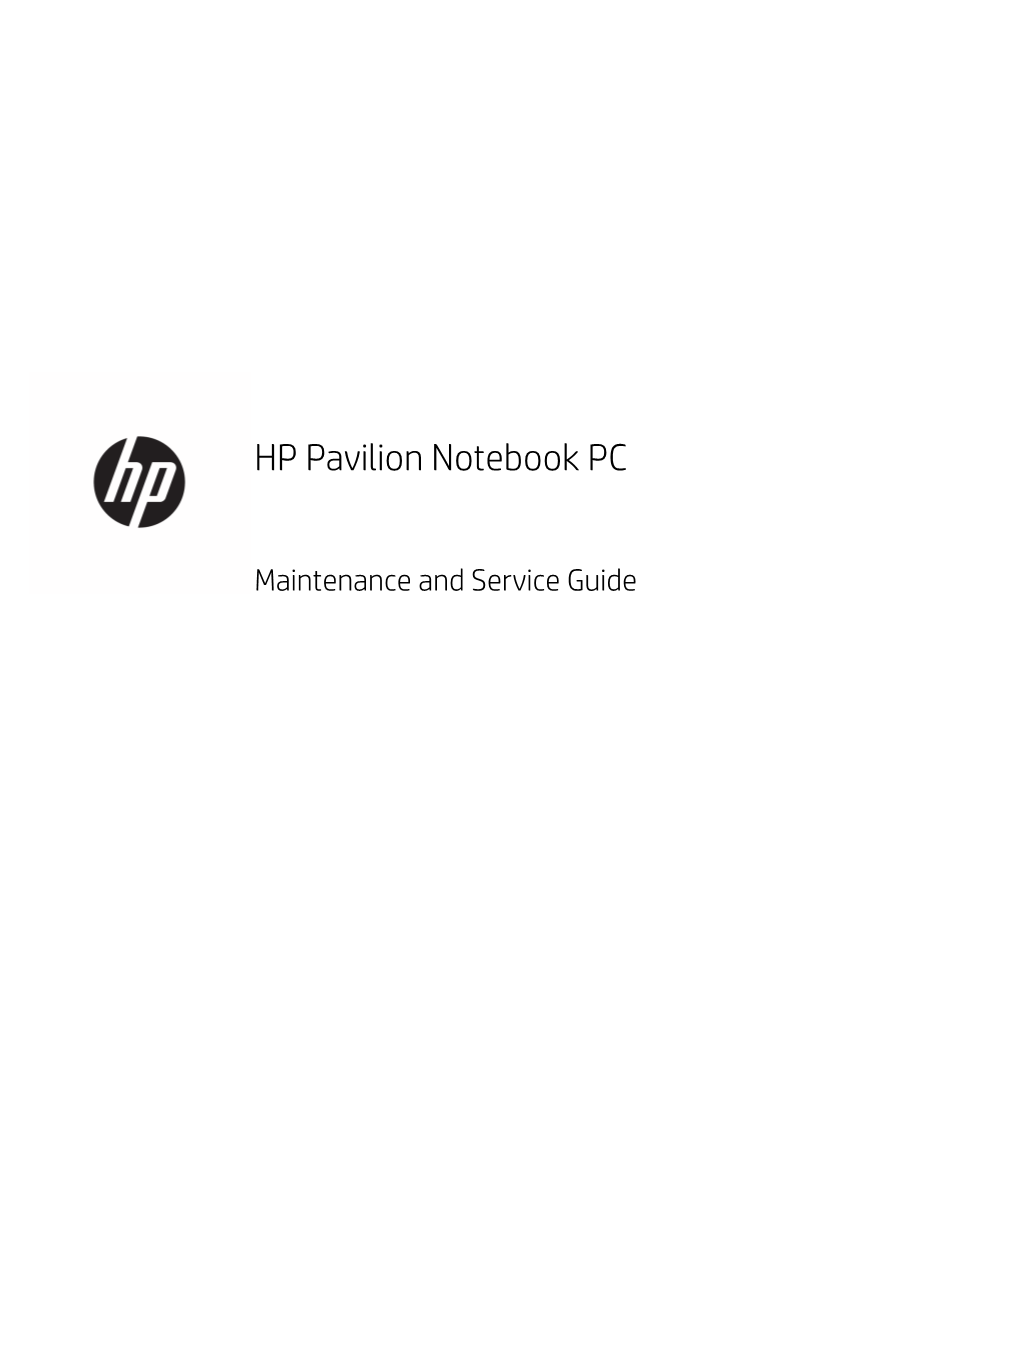 HP Pavilion Notebook PC Maintenance and Service Guide